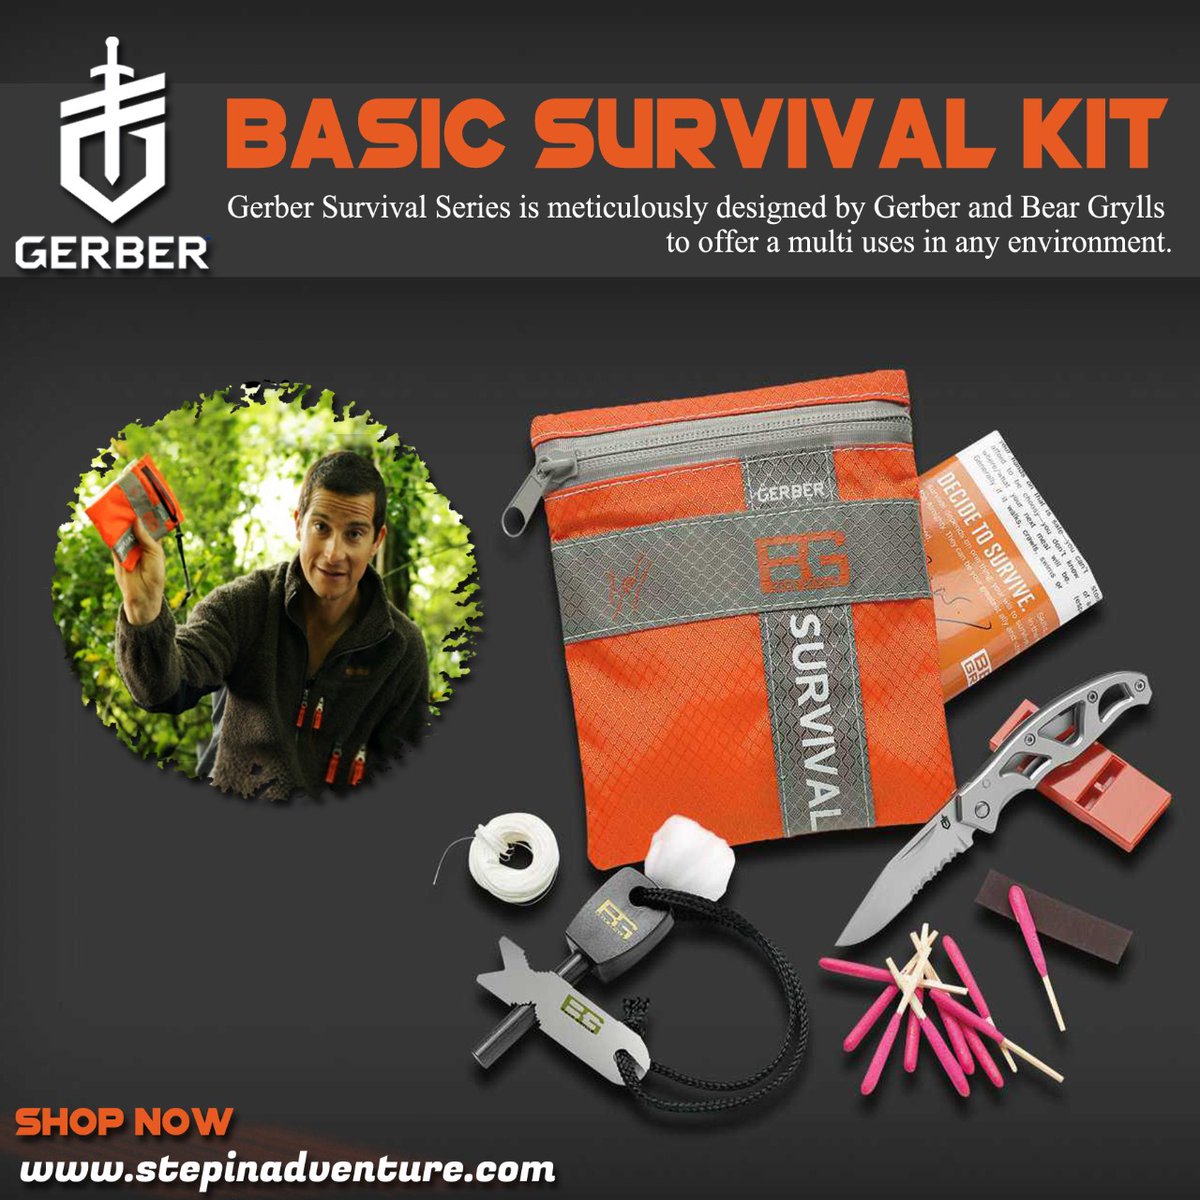 Buy The survival kits which includes the best camping & trekking equipments.
bit.ly/3gHZjan
#survivalkit #Gerber #Gerberkit #trekkingequipments #camping #survivalgear #campinggear #hikinggear #outdoorgear #backpackinggear
#campinglife⠀#gerbersurvivalkit #shoponline